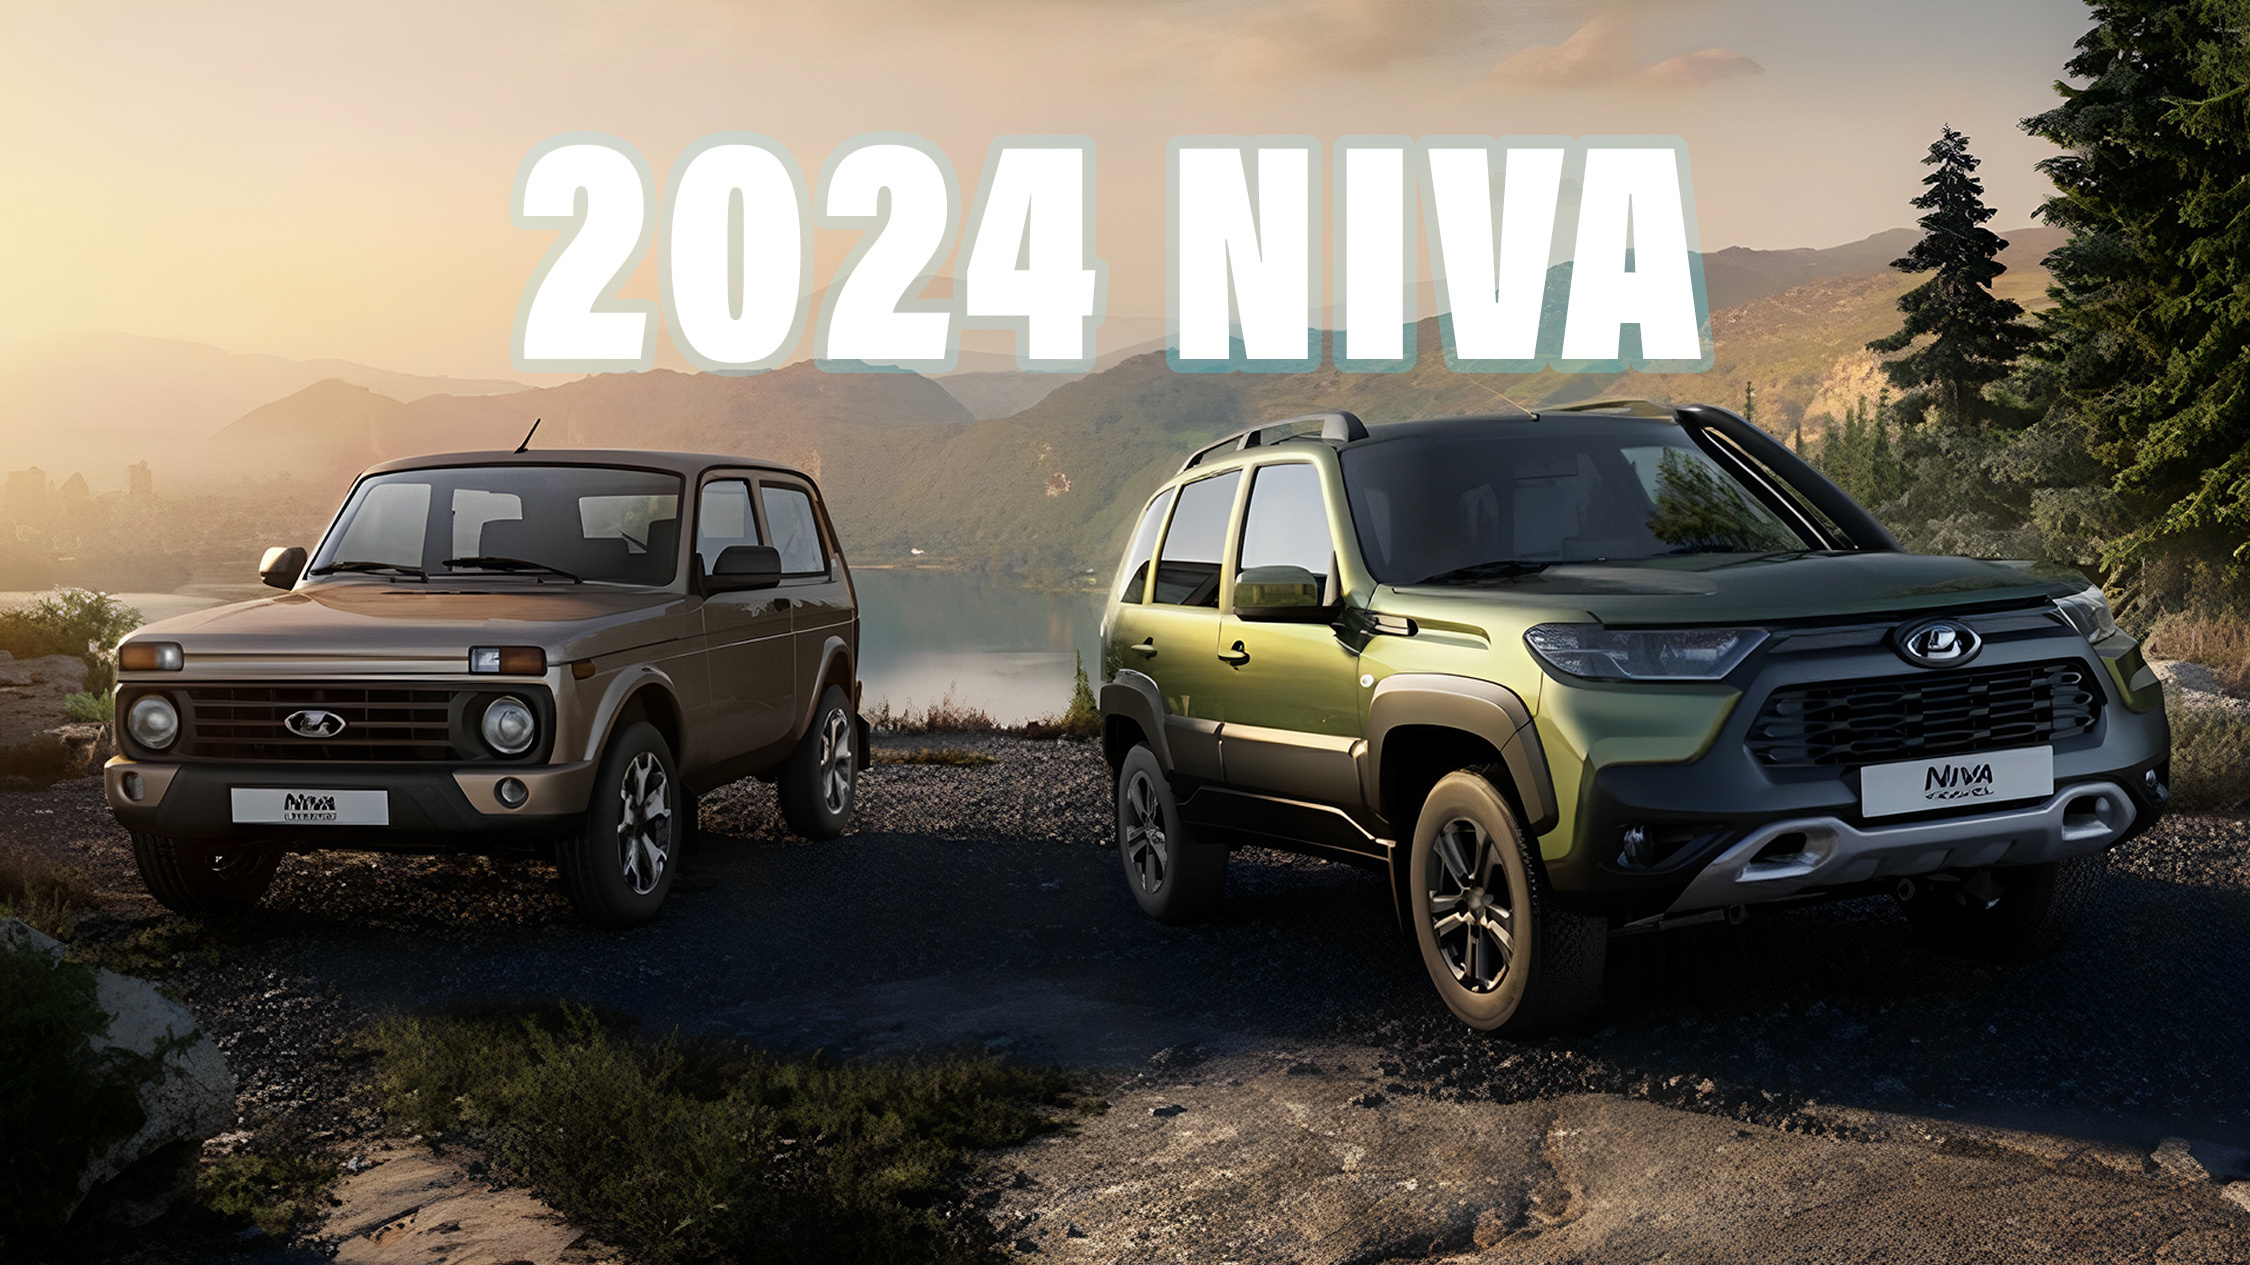 2024 Lada Niva Goes High Tech With ABS And Backlit Cluster